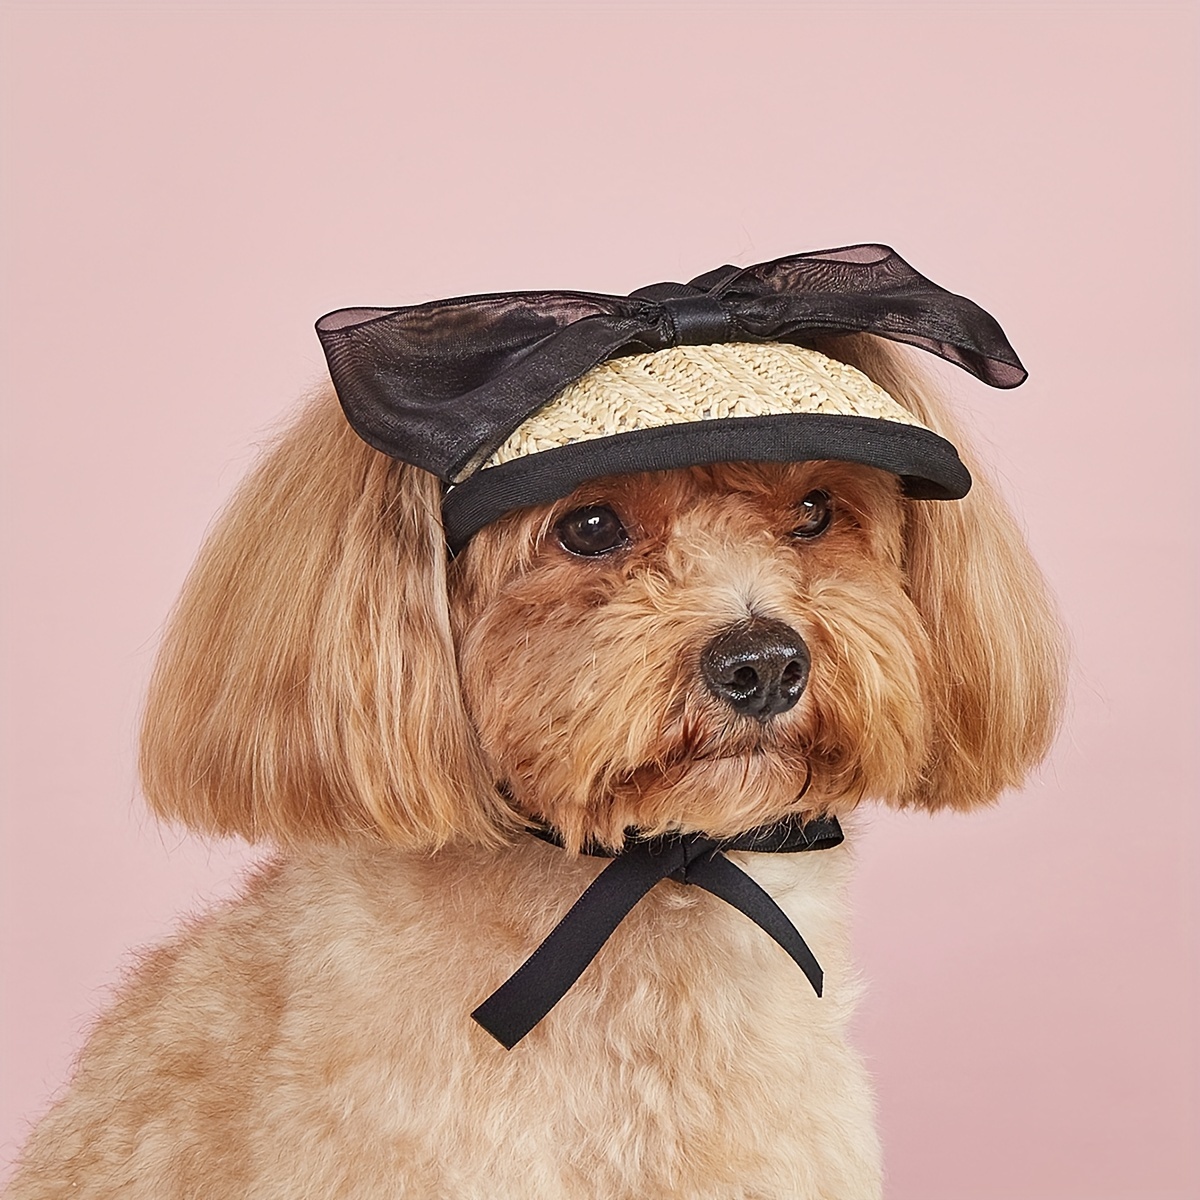 

Dog Lace Bow Hat - Adjustable Elastic Pet Cap For Small, Medium, Large Breeds | Hand Wash Only | Summer/spring/fall Season | Polyester Blend | Tie-on Style | Dog Accessories